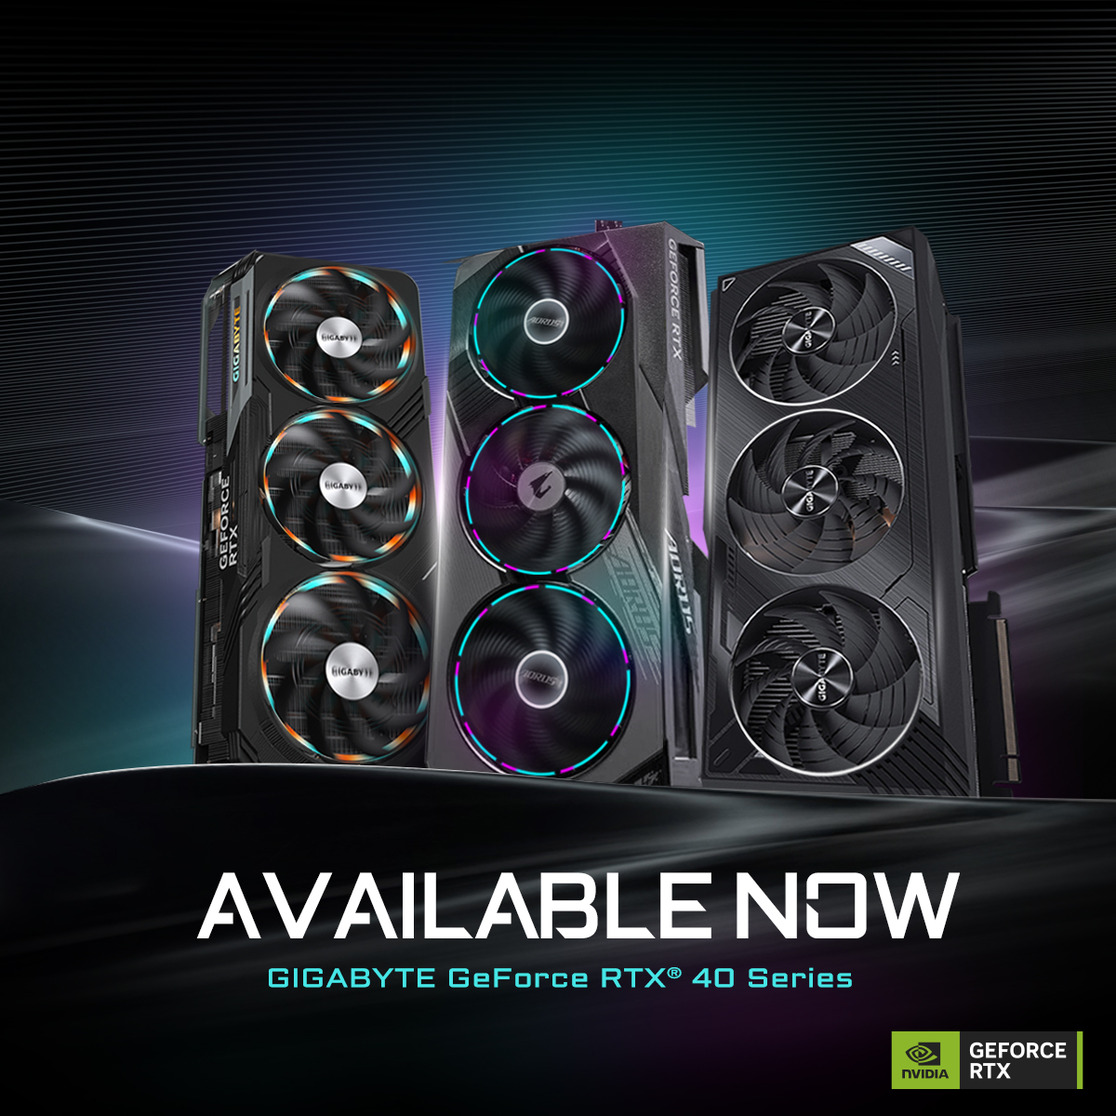 Take your PC to the next level with RTX 40 series GPUs